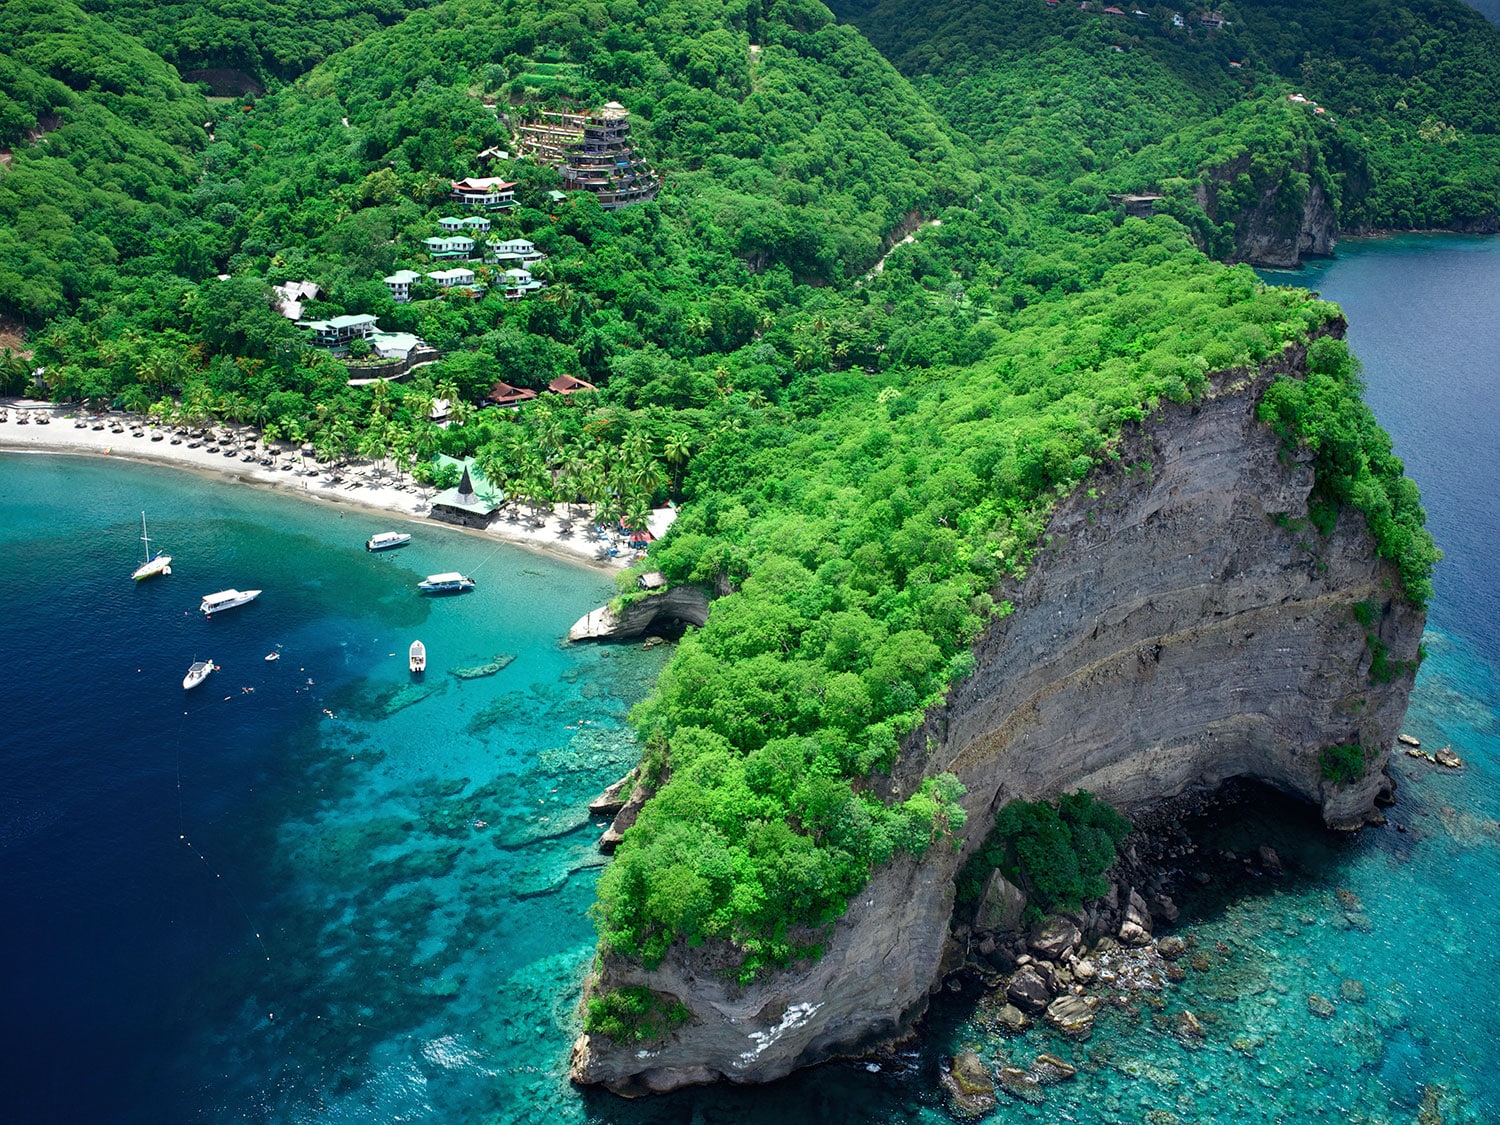 An aerial view of the Anse Chastanet resort on the Caribbean island of St. Lucia.